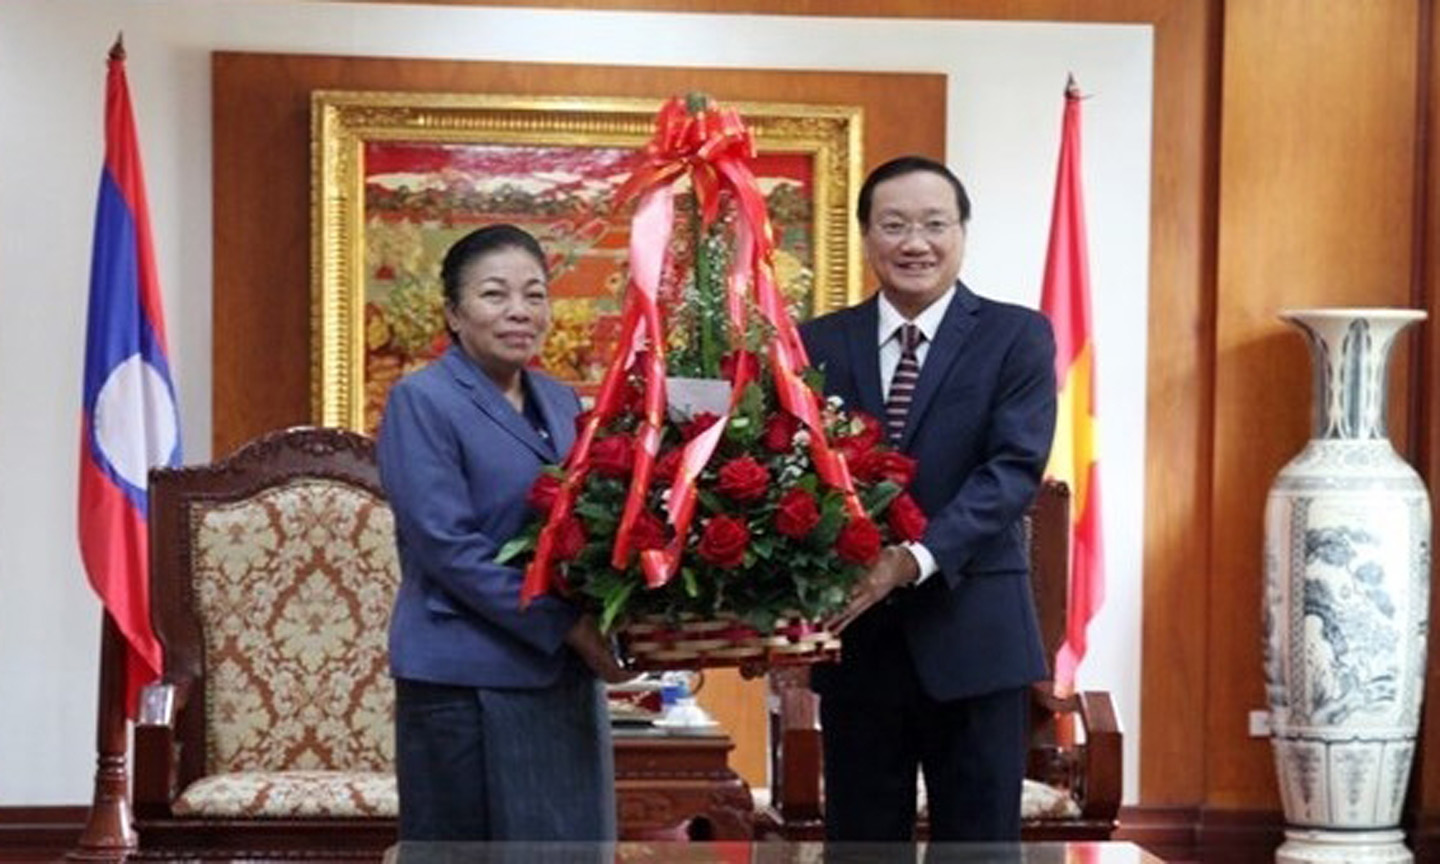 Sounthone Sayachak (L), head of the LPRP Central Committee’s Commission for External Relations, presents congratulations flowers to Vietnam’s Ambassador to Laos Nguyen Ba Hung on February 3 (Photo: VNA)